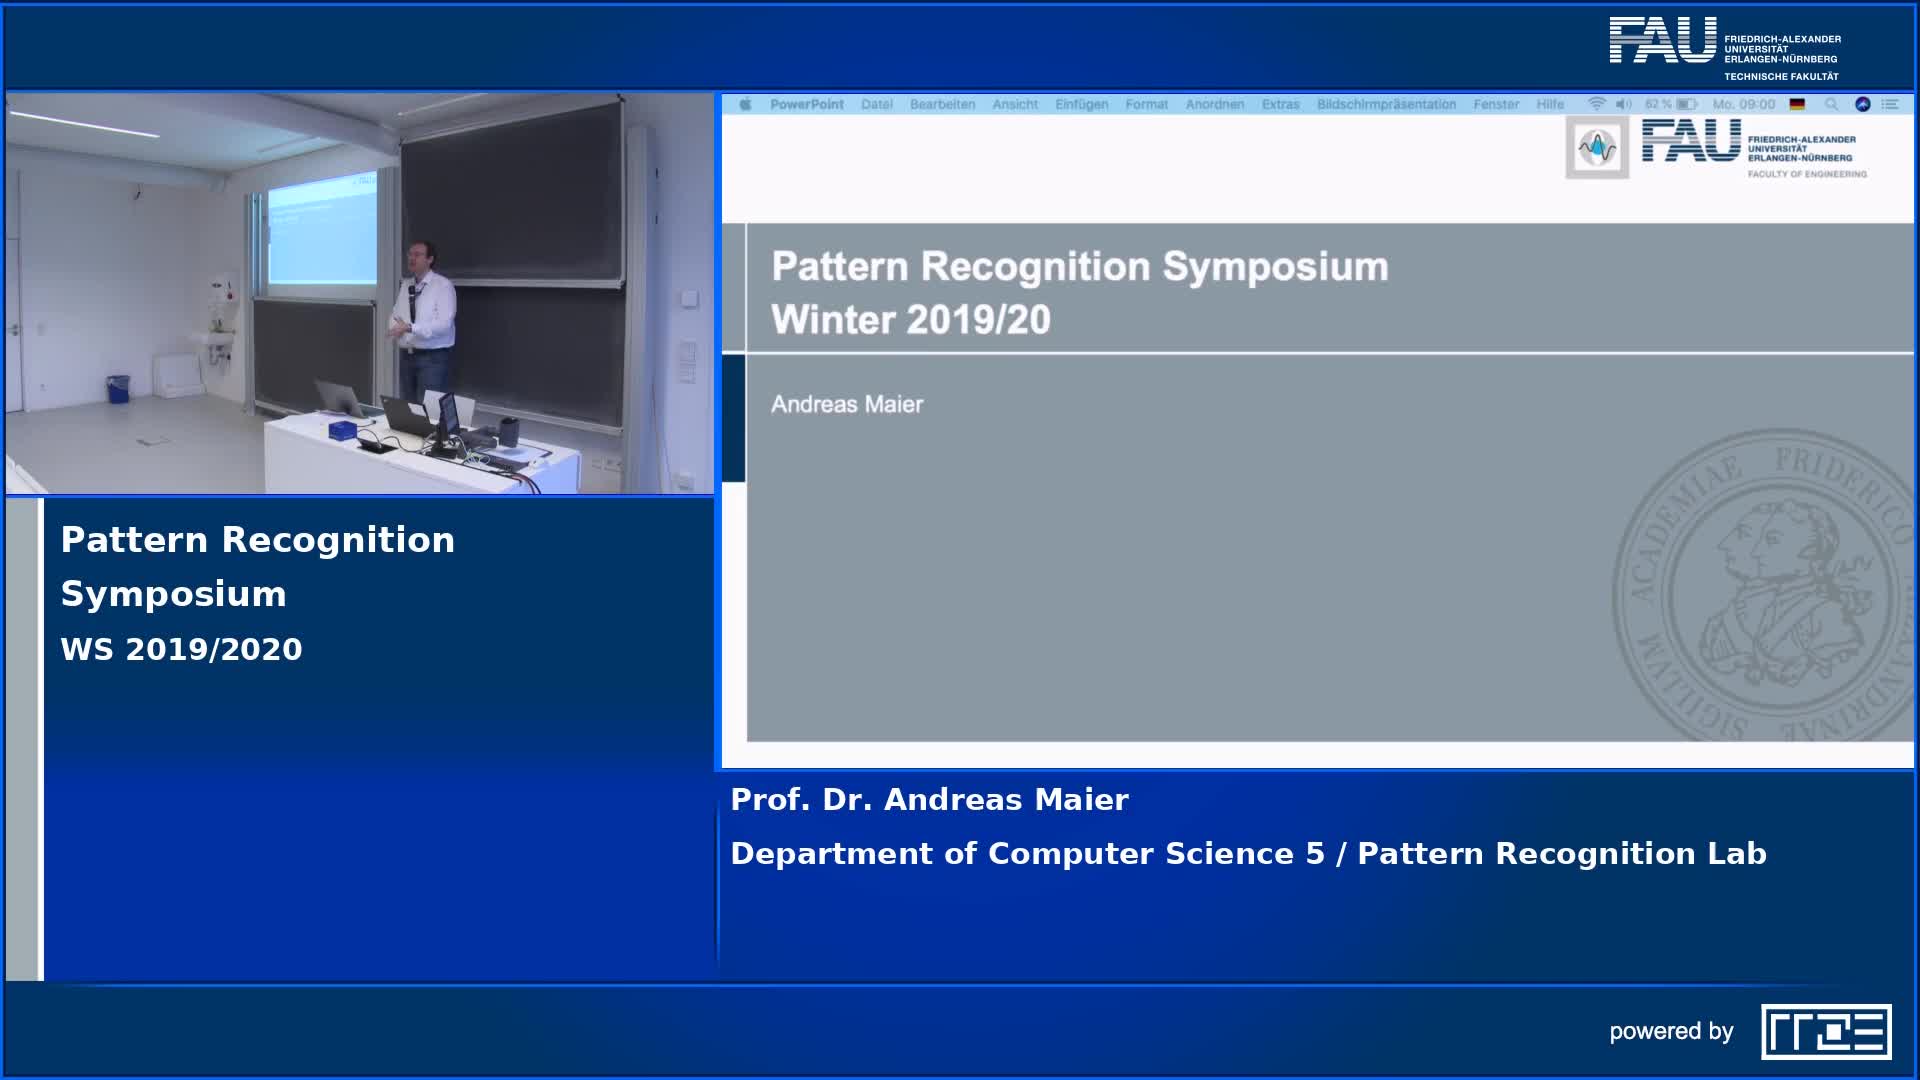 Pattern Recognition Symposium preview image